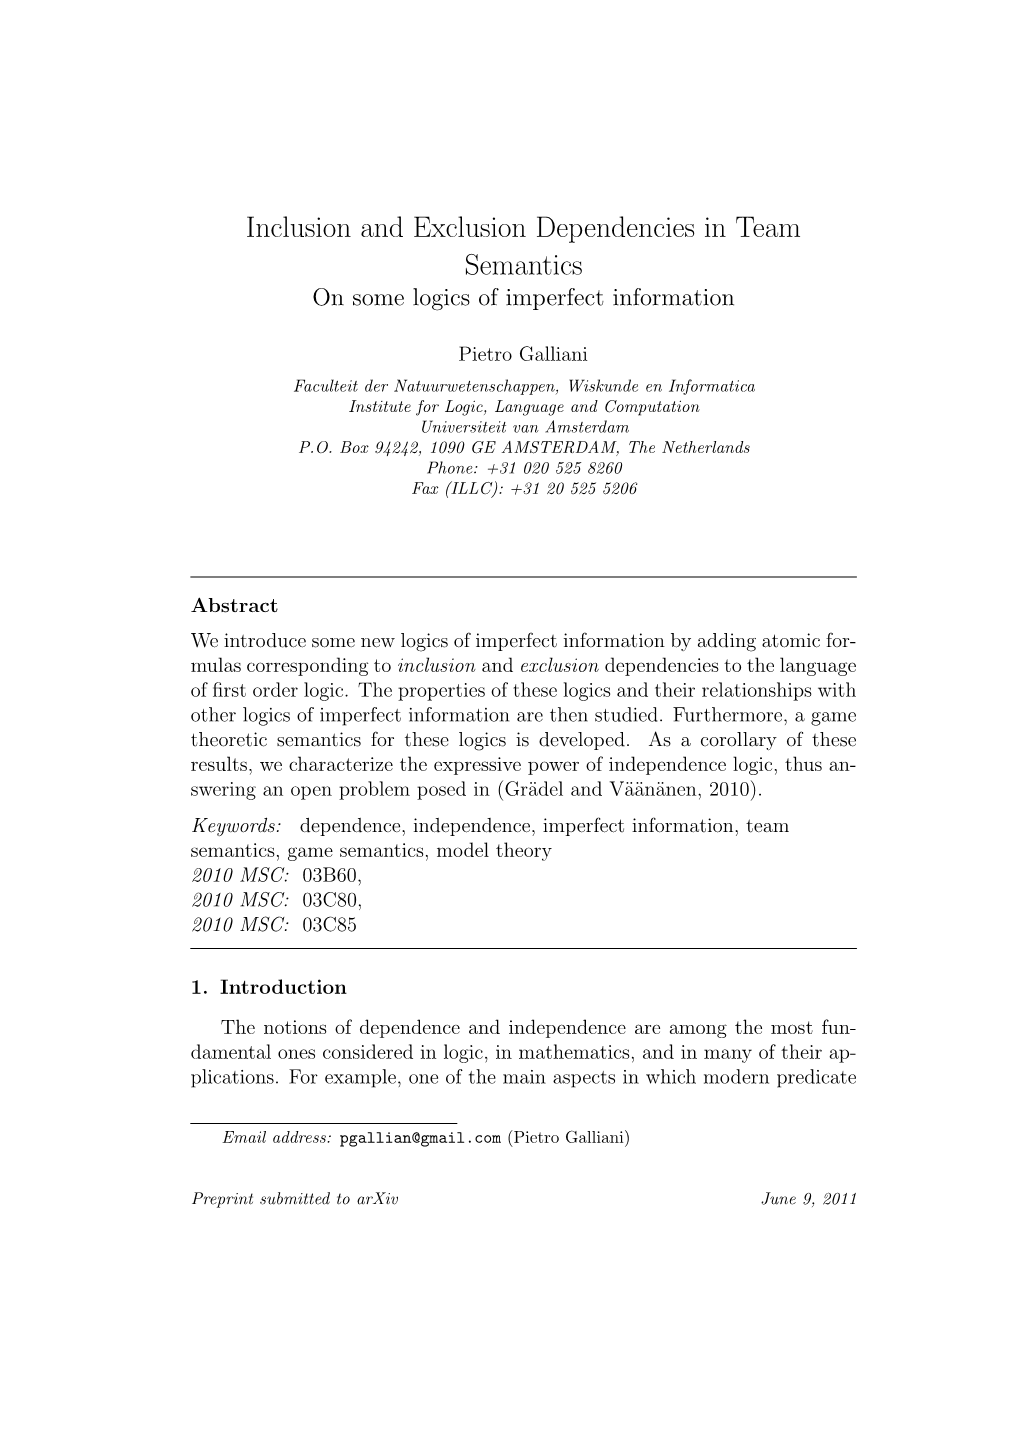 Inclusion and Exclusion Dependencies in Team Semantics on Some Logics of Imperfect Information